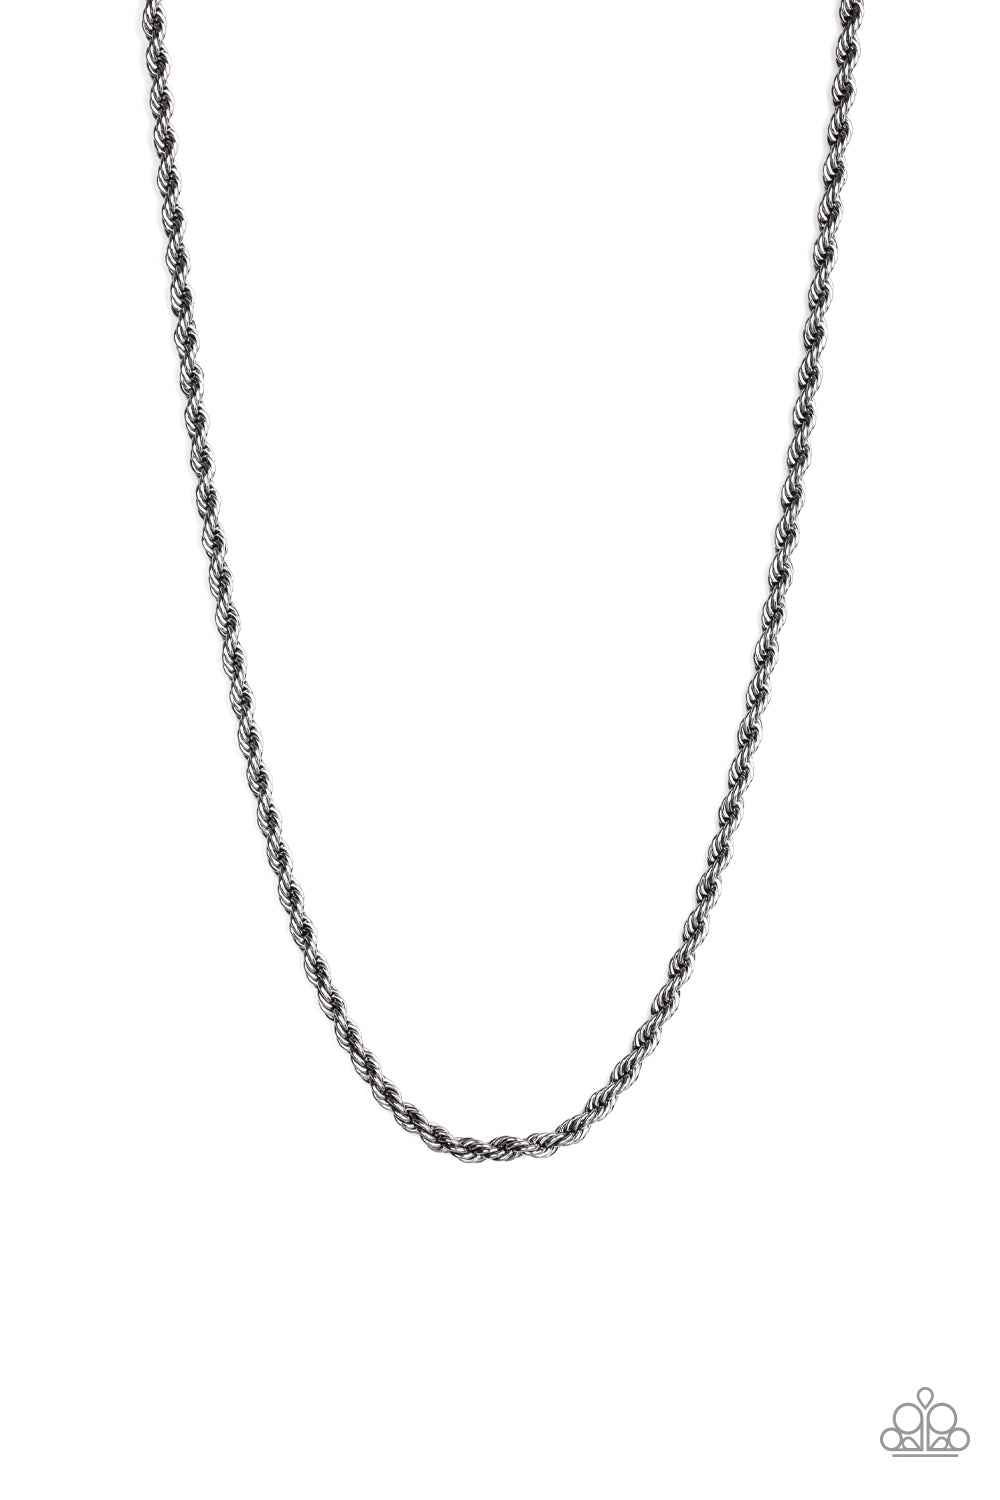 Double Dribble Black Urban Necklace - Paparazzi Accessories.  Brushed in a high-sheen finish, a thick gunmetal rope chain drapes across the chest for a classic, upscale look. Features an adjustable clasp closure.  All Paparazzi Accessories are lead free and nickel free!  Sold as one individual necklace.